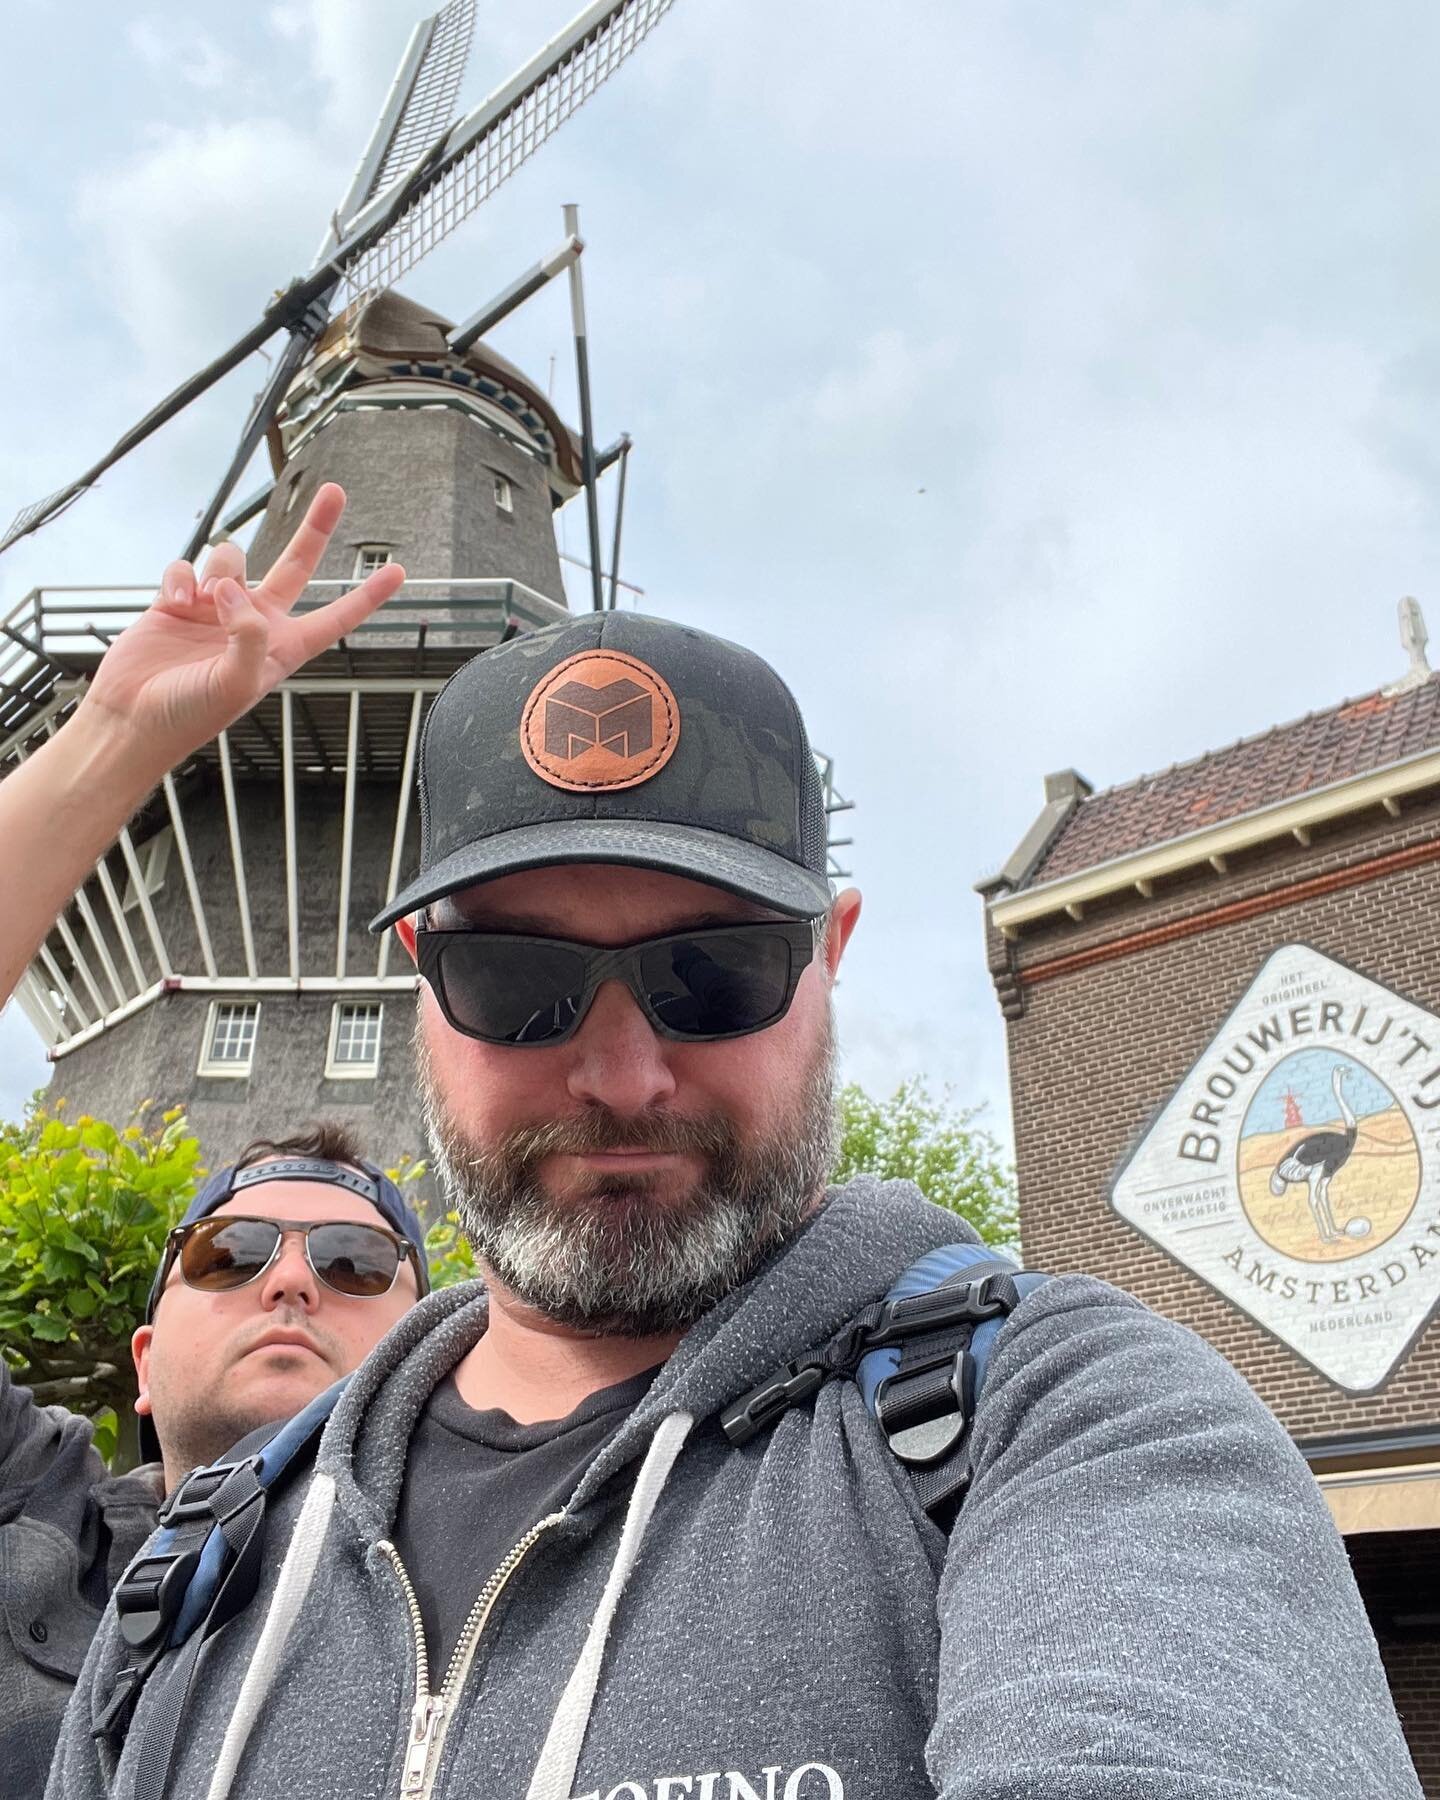 Legacy Mechanical World Tour! @chadswayze was recently in Rotterdam helping to promote the Police Fire Games @wpfg2023winnipeg (coming to Winnipeg in the summer of 2023!), all while sporting his favourite Legacy Mechanical merchandise. He happened to